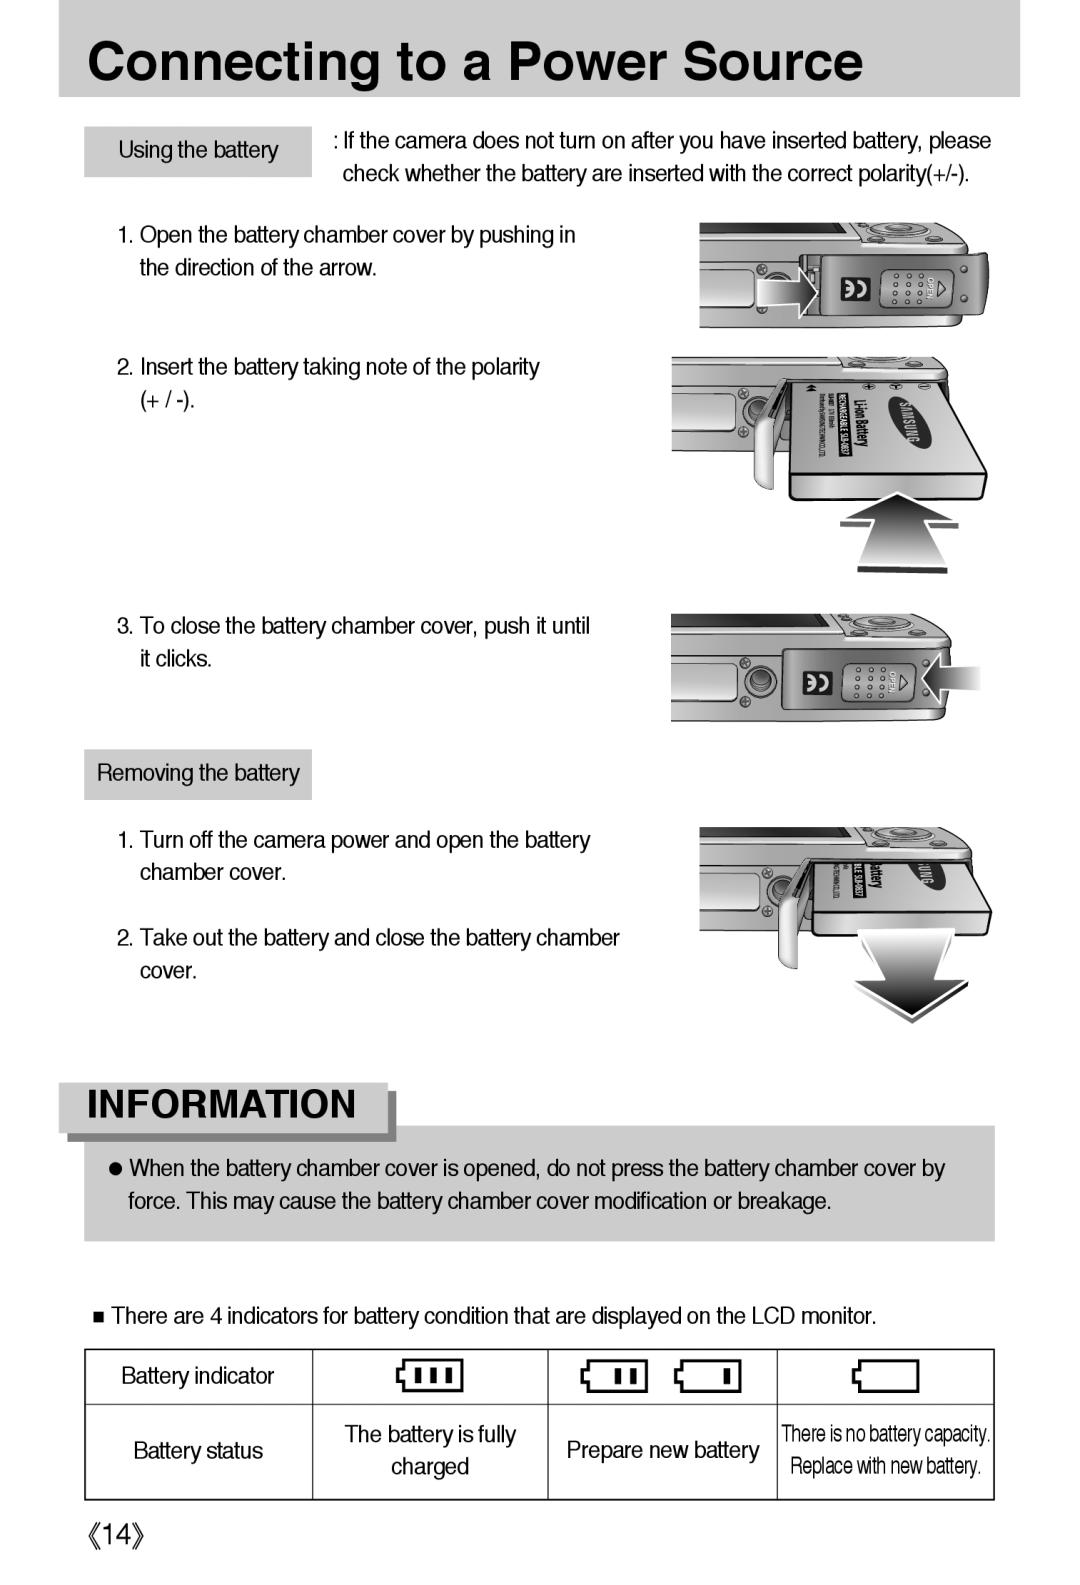 Samsung L50 user manual 《14》, Connecting to a Power Source, Information, Prepare new battery 